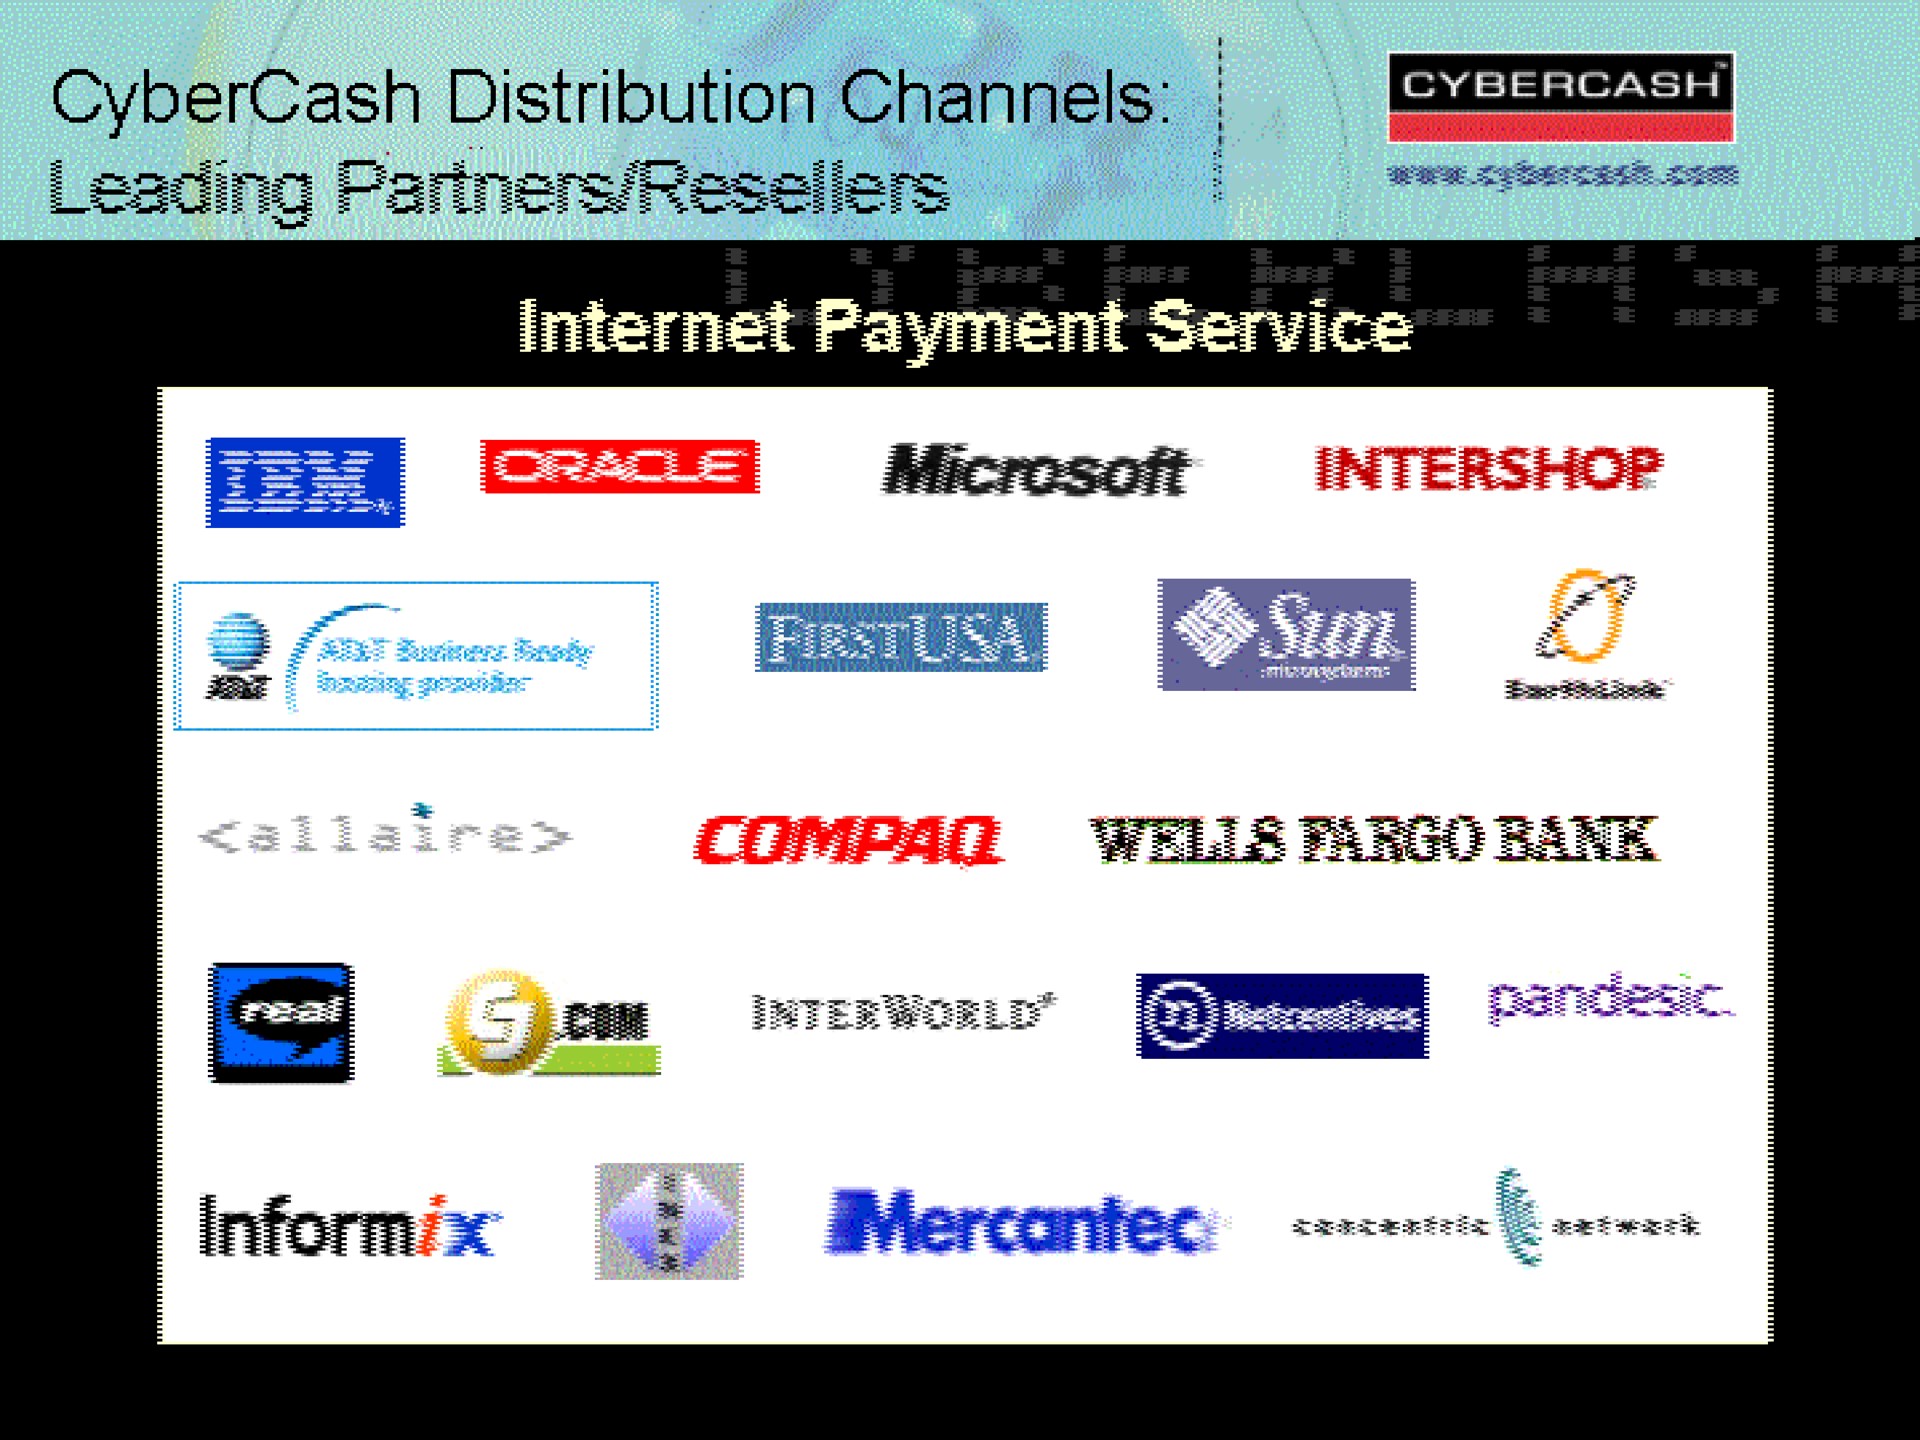 distribution channels ers payment service | CyberCash